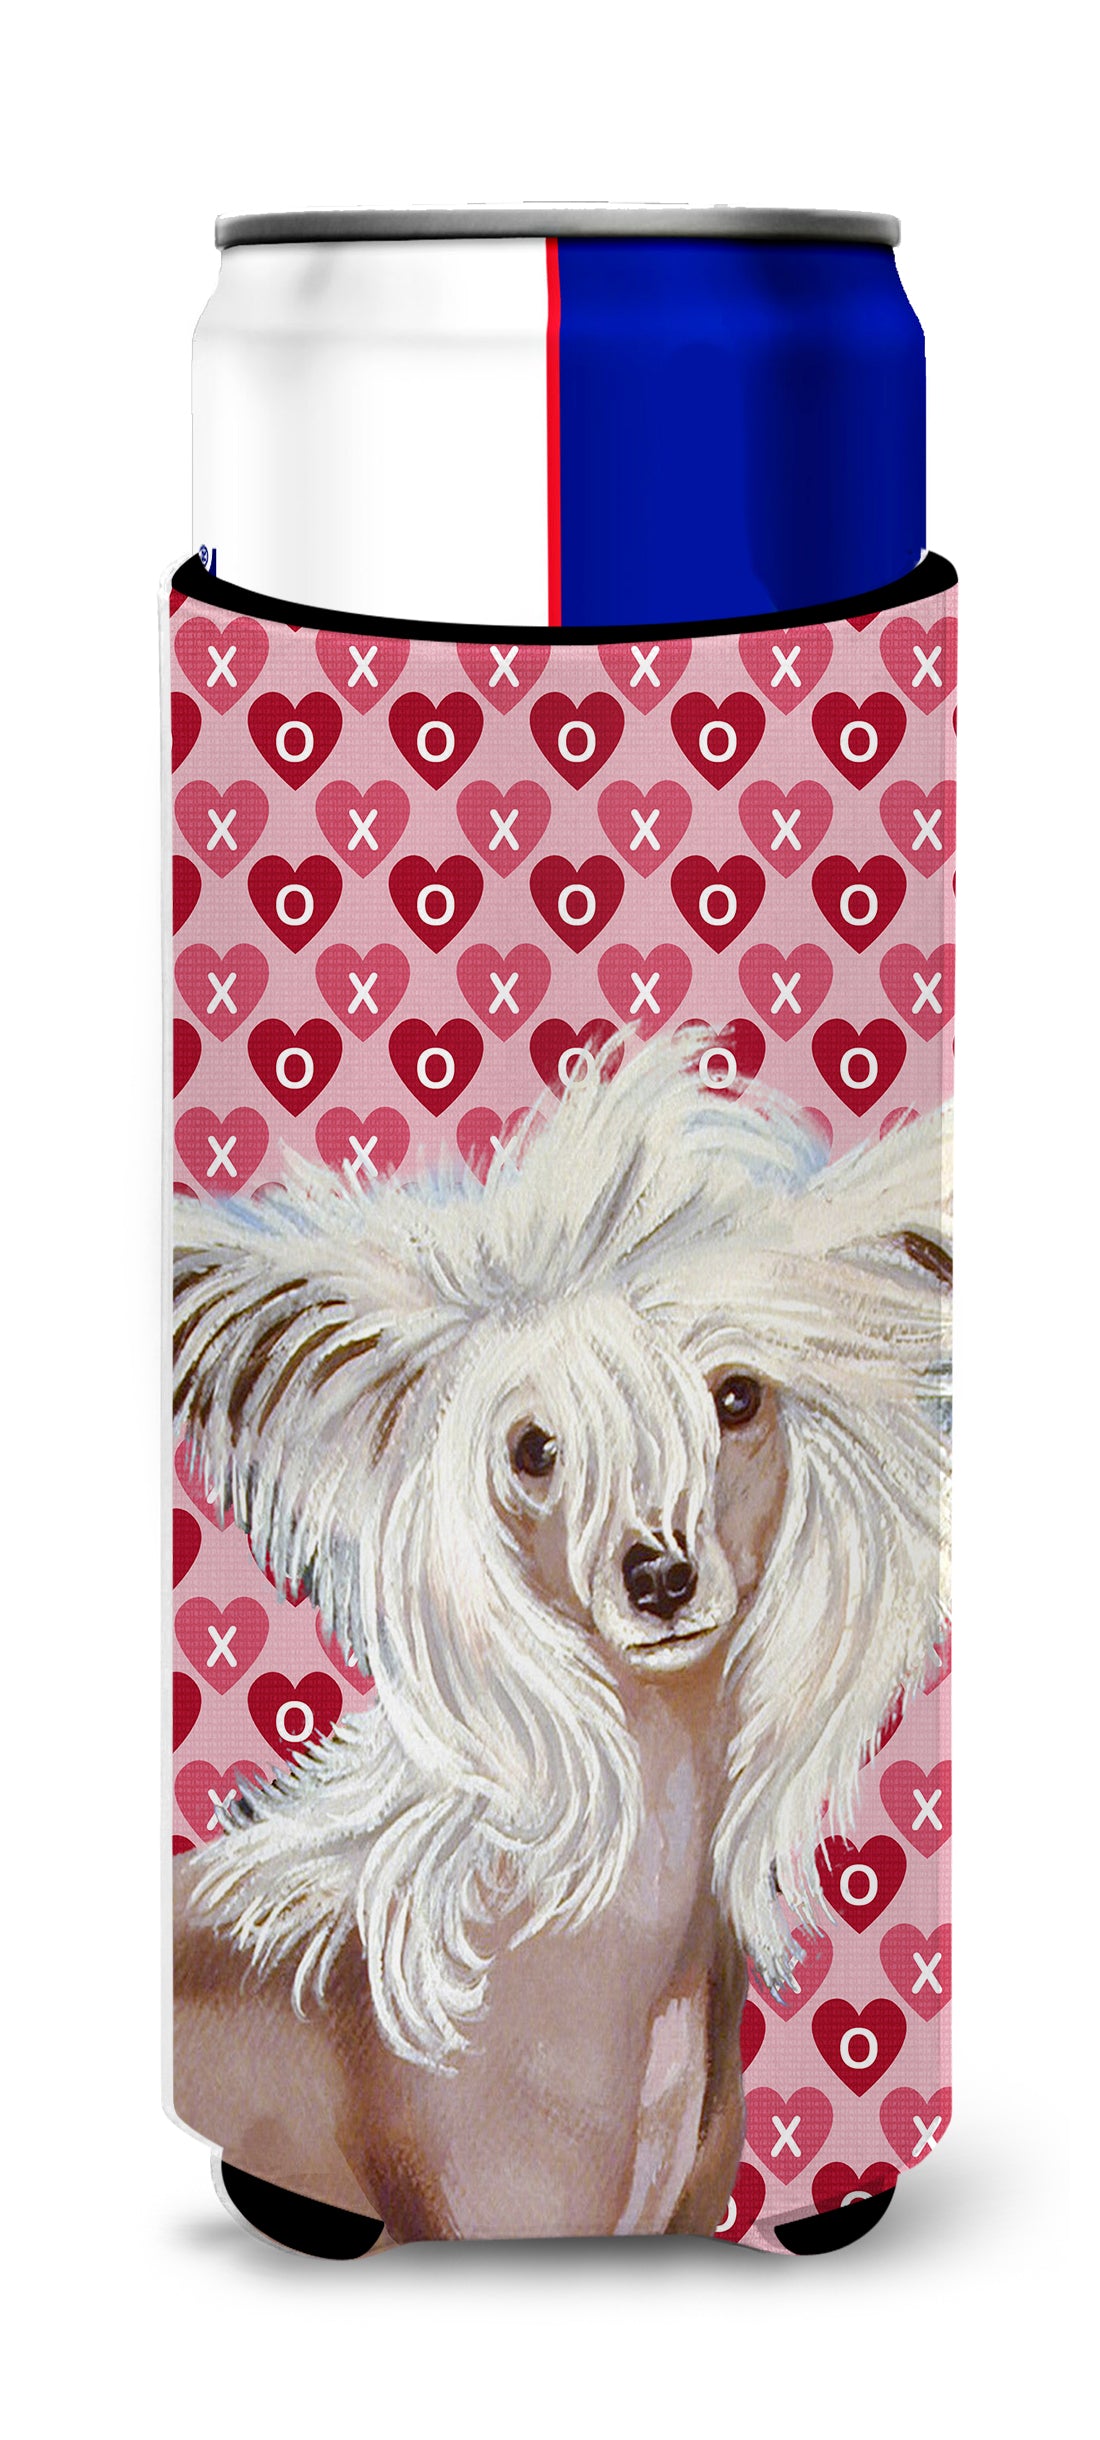 Chinese Crested Hearts Love and Valentine's Day Portrait Ultra Beverage Insulators for slim cans LH9167MUK.